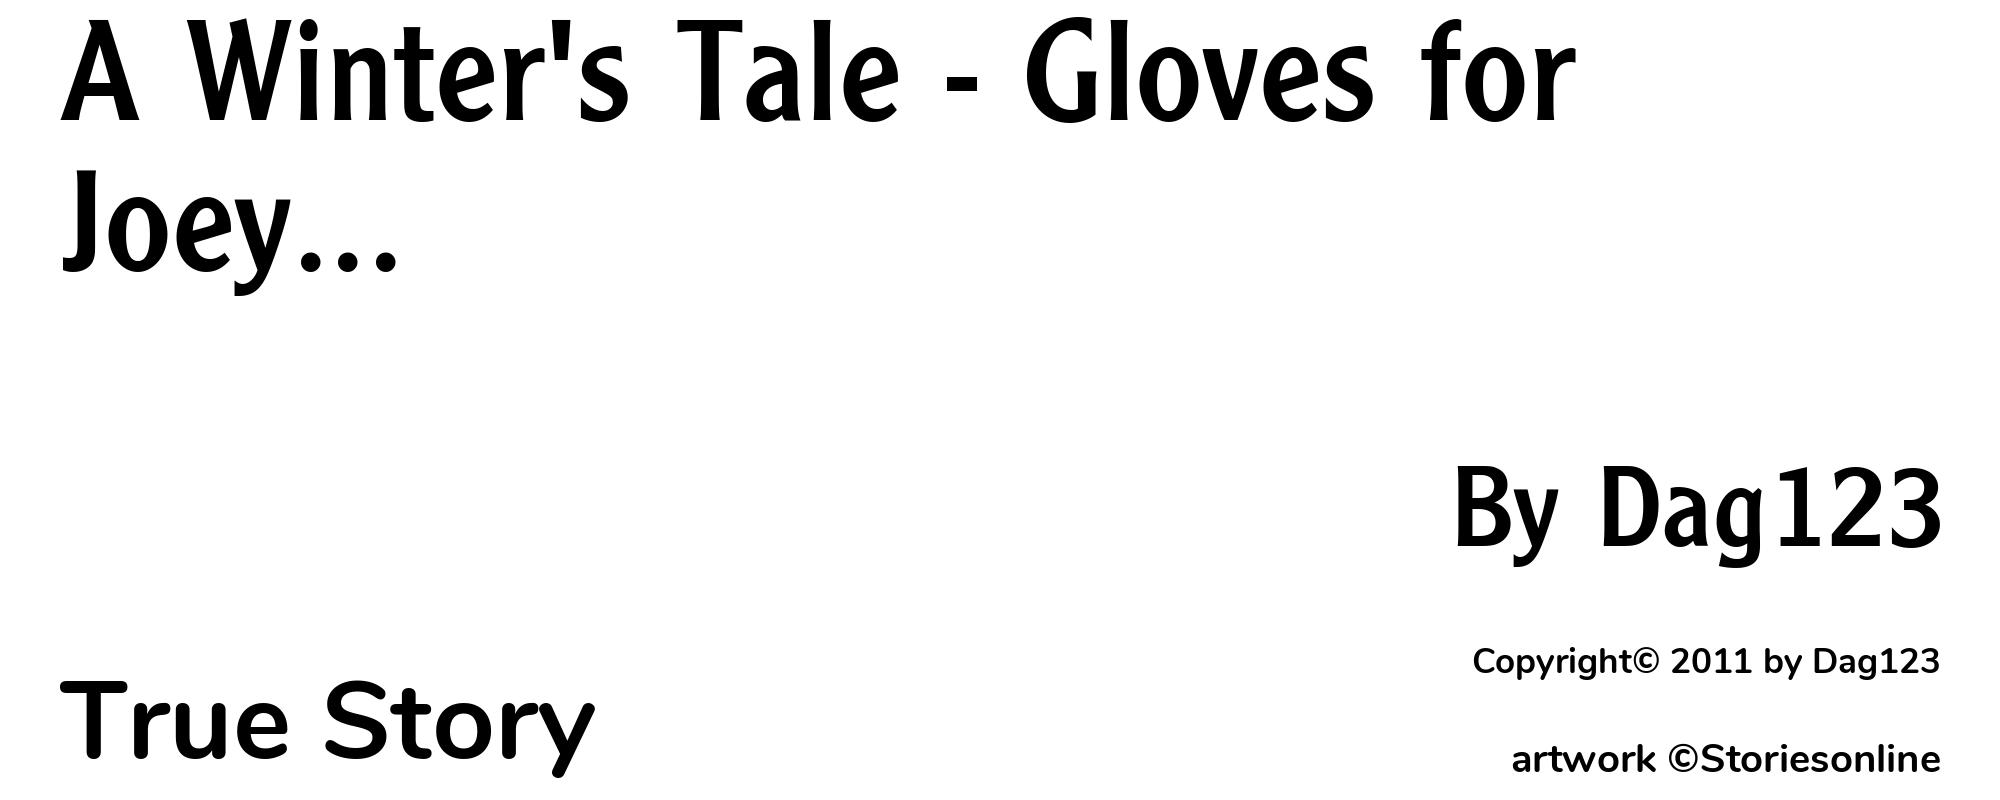 A Winter's Tale - Gloves for Joey... - Cover